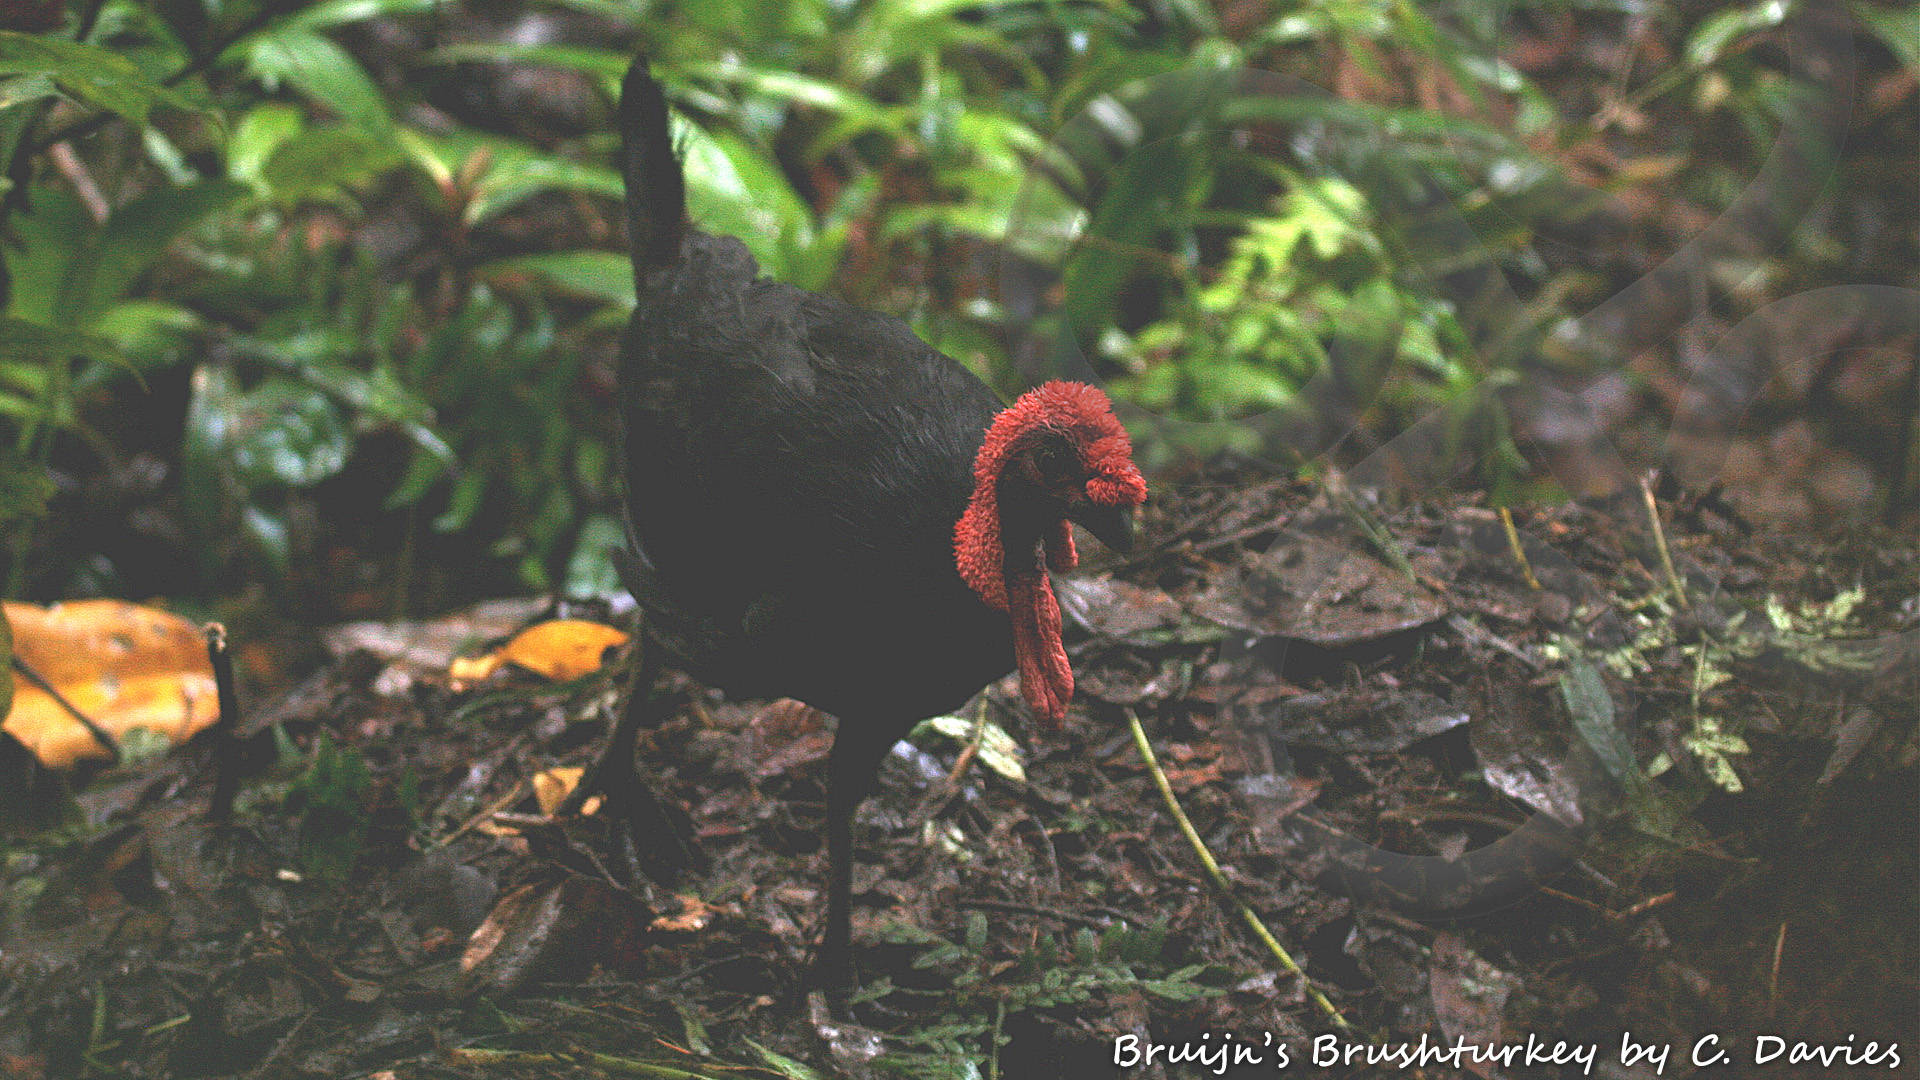 Adult mound-tending male Bruijn's Brushturkey Aepypodius bruijnii photographed for the first time ever in the wild, atop its nest mound in ridgetop cloud-forest on Mount Danai, Waigeo Island, Raja Ampat archipelago, eastern Indonesia. Copyright © Papua Expeditions and Charles Davies